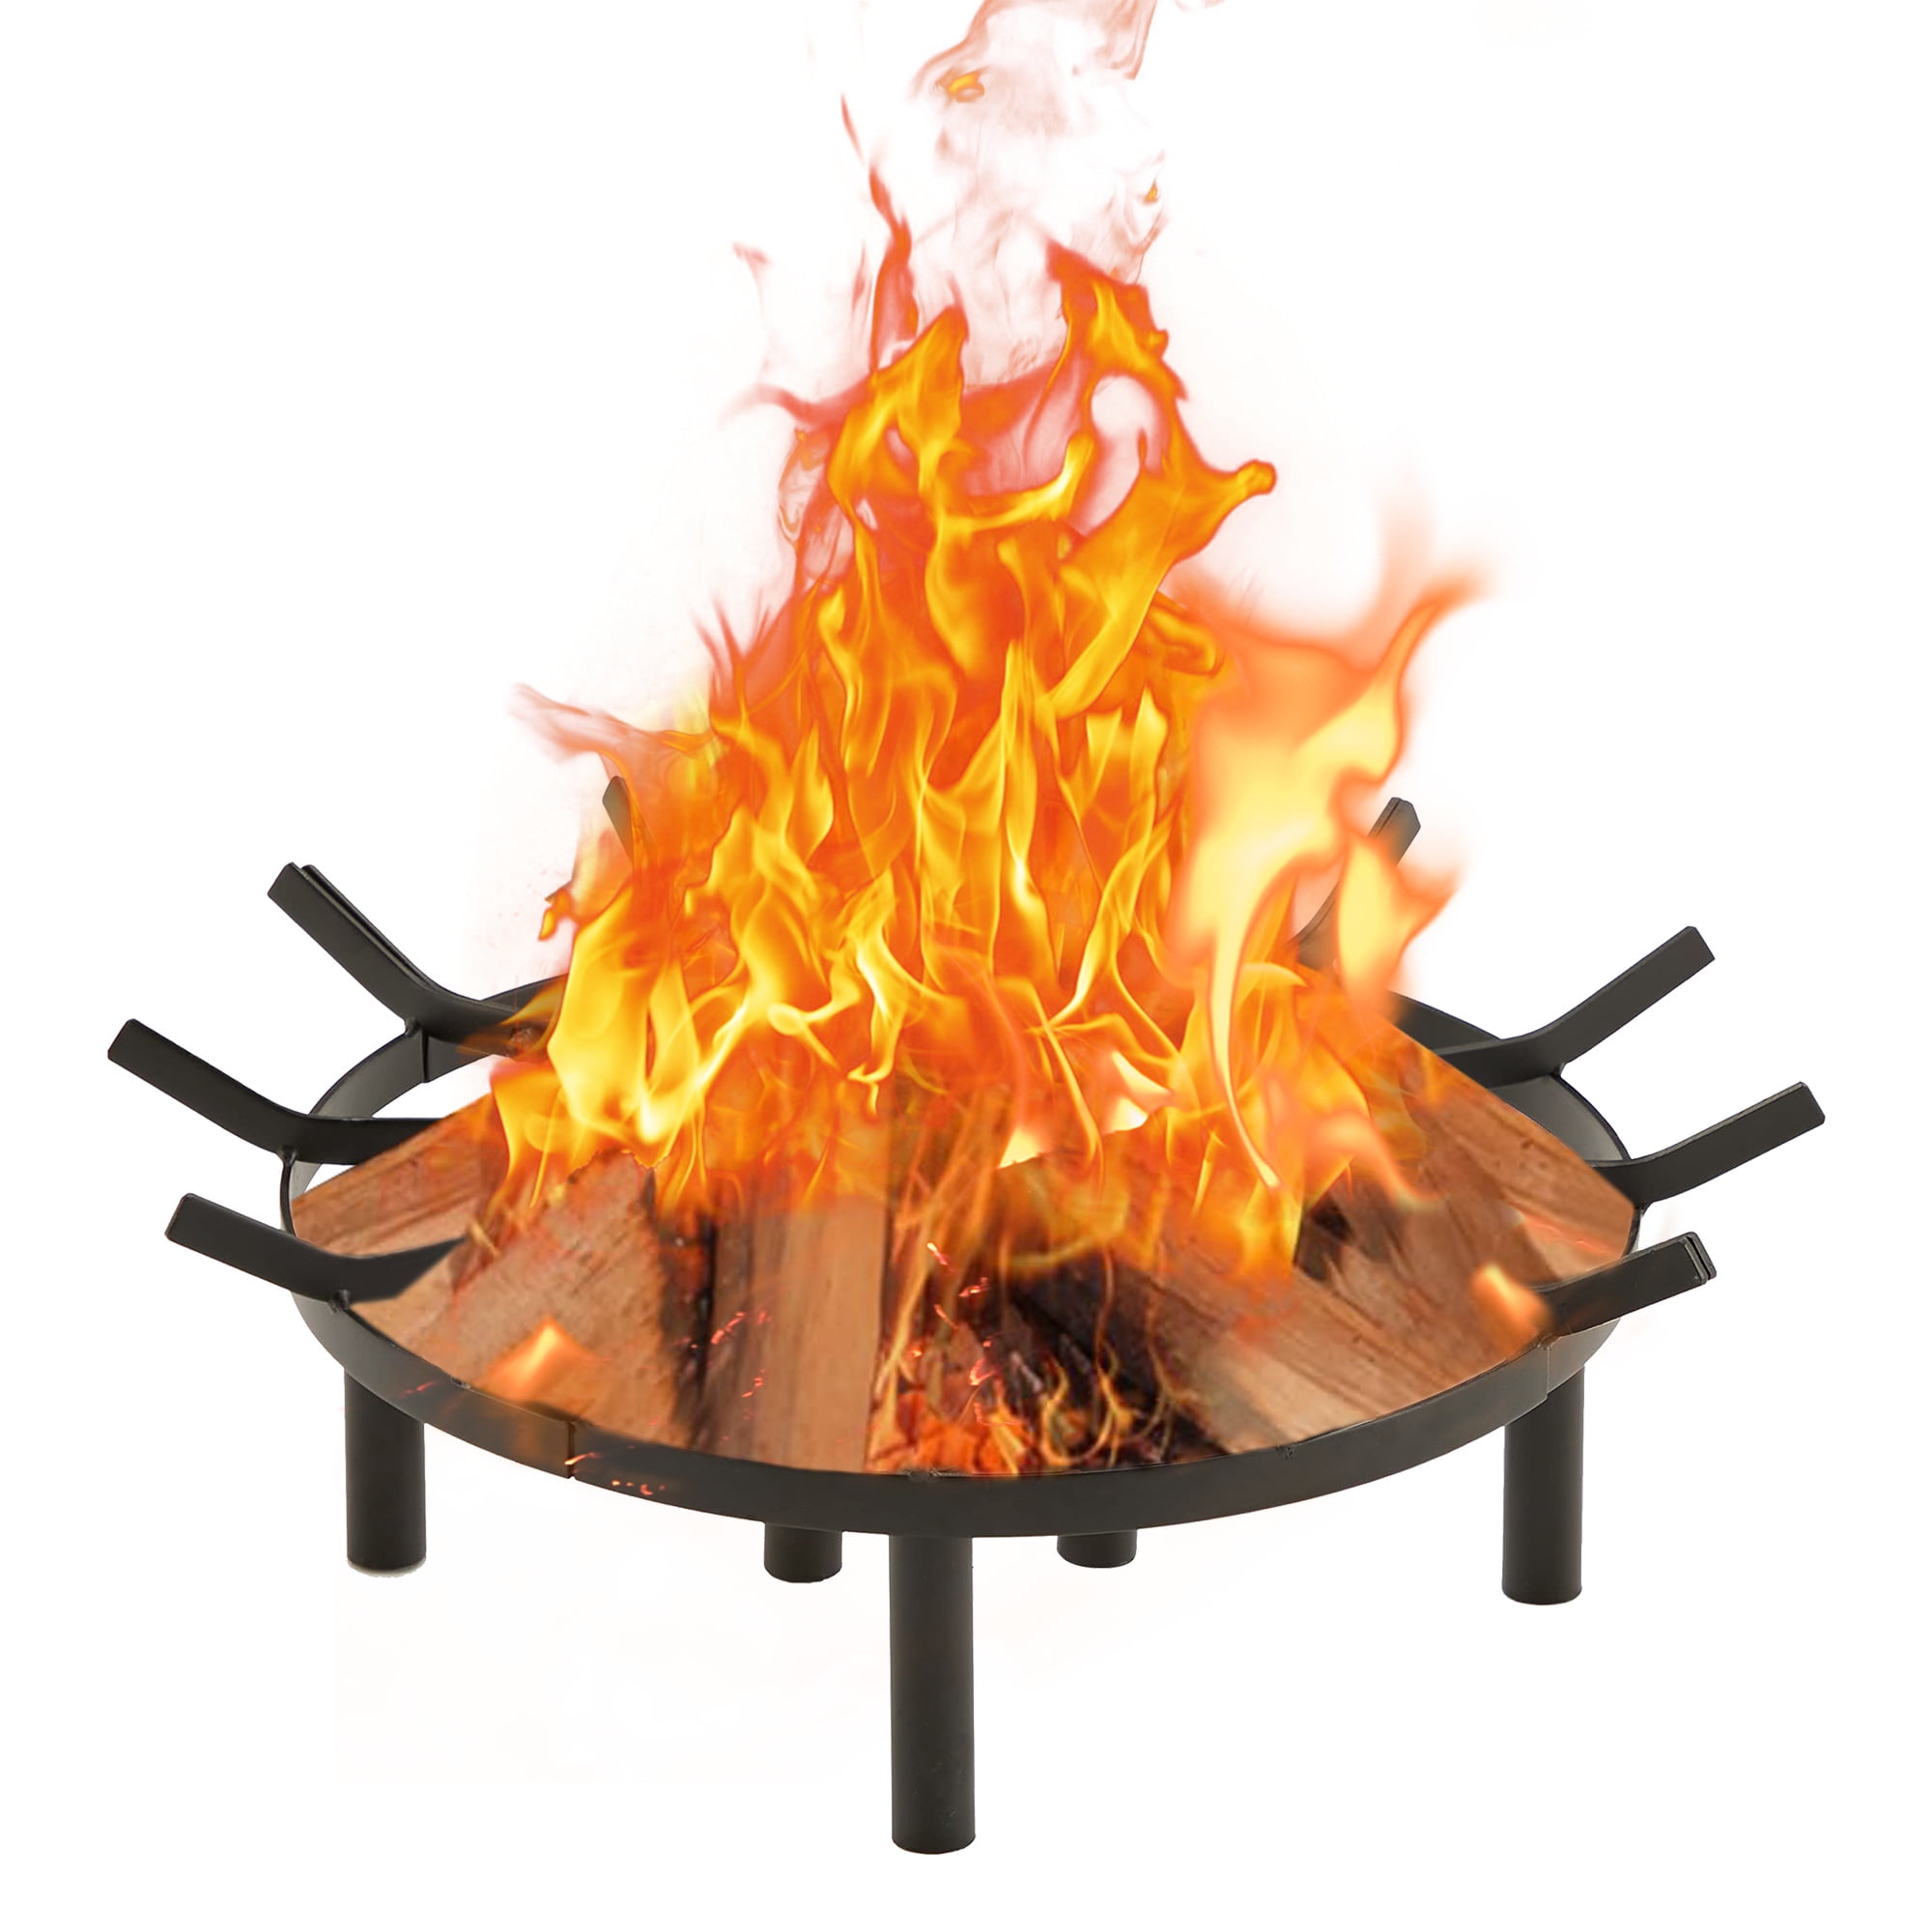 32in Fire Grate Log Grate ,Wagon Wheel Firewood Grates 16 Iron